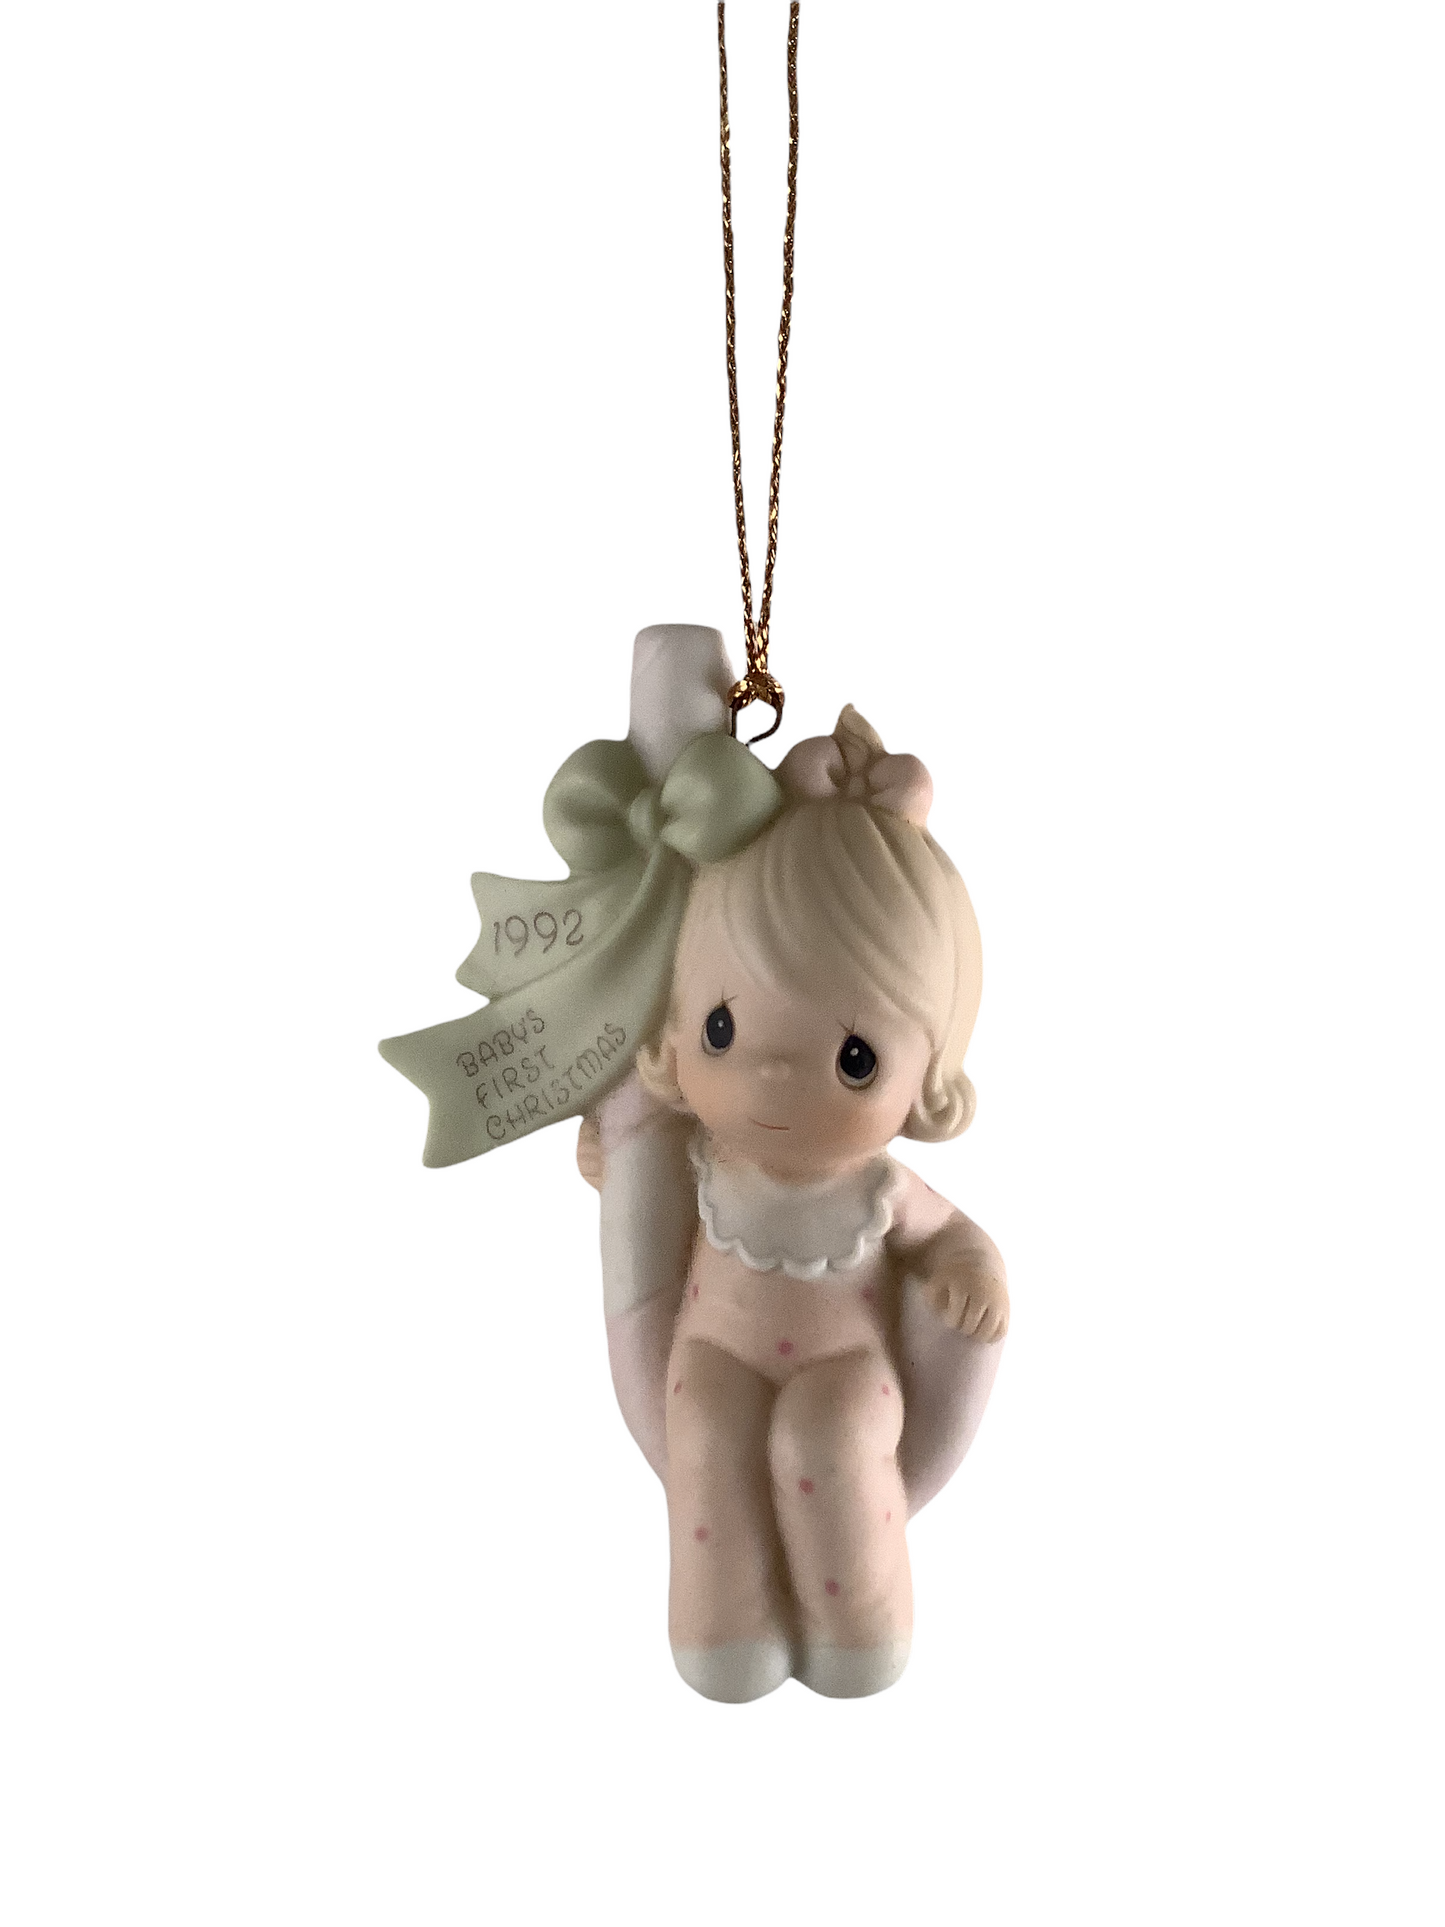 Baby's First Christmas 1992 (Girl) - Precious Moment Ornament